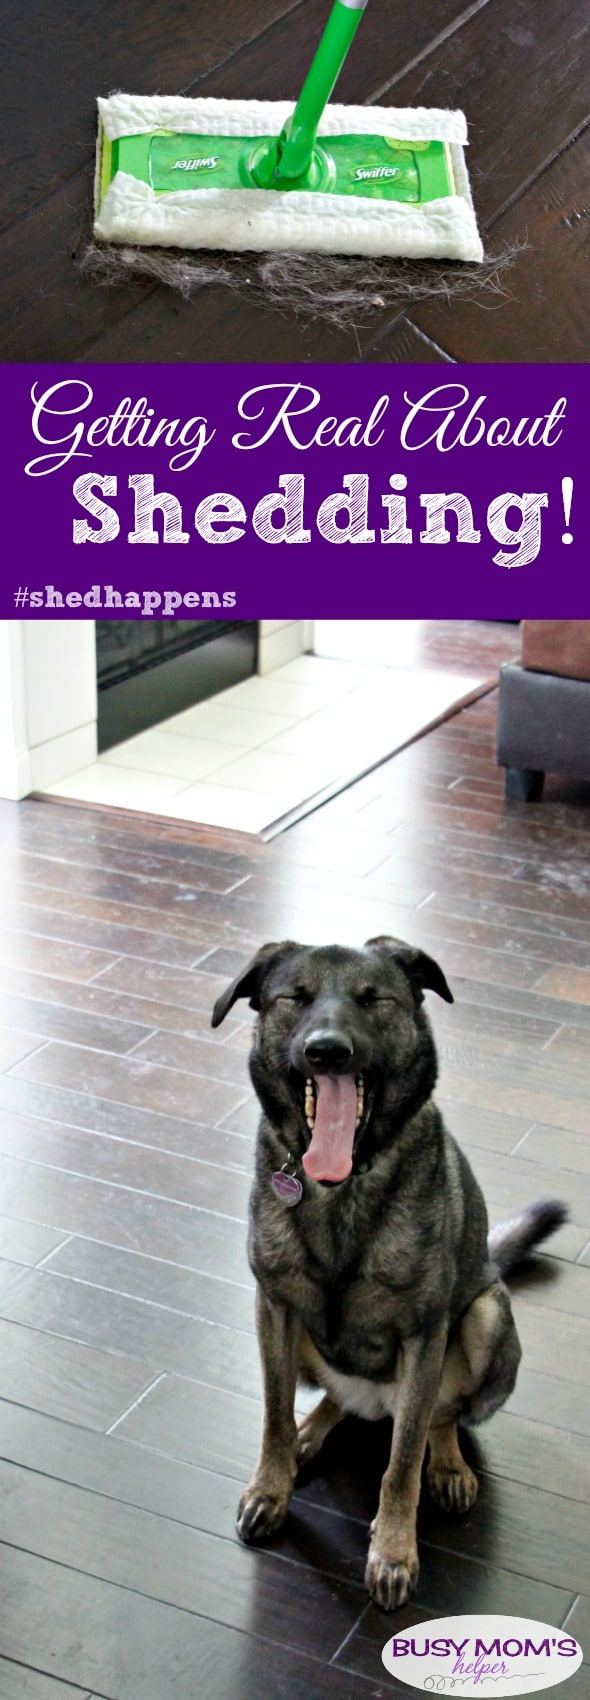 Getting Real About Shedding because #shedhappens #ad #swifferfanatic #pets #cleaning #pethair #dogs #puppies #animals